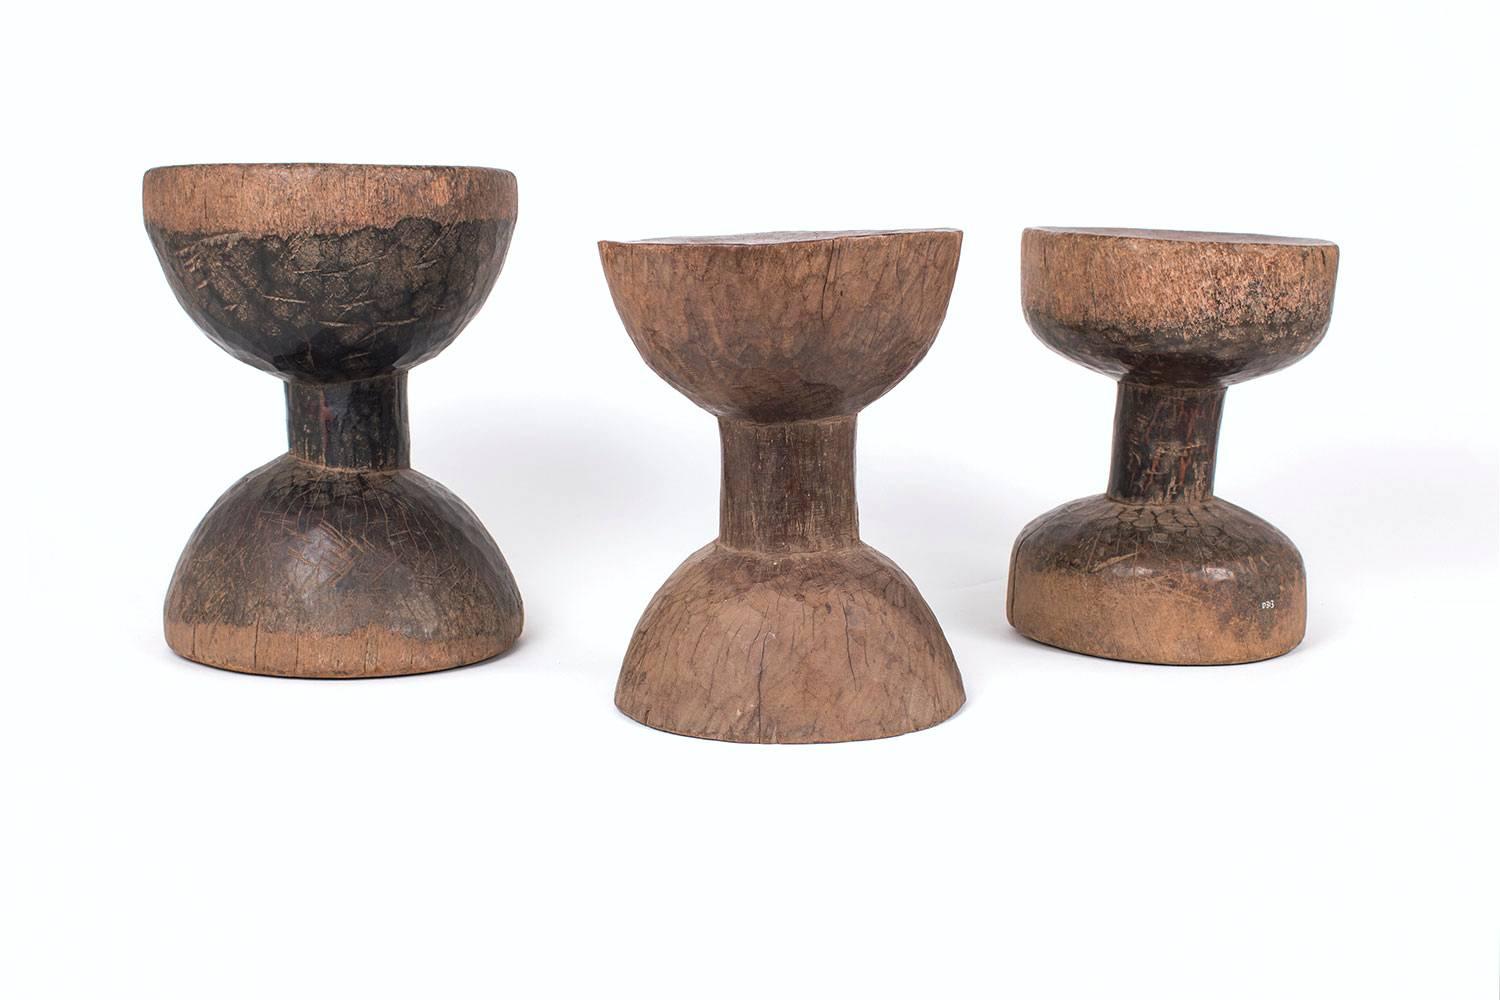 This set of drum stools are from Ethiopia, circa early 20th century and made from dense wood with natural patina and good age. These drum stools have old inventory numbers on them from a previous collection. These were initially made for stools but